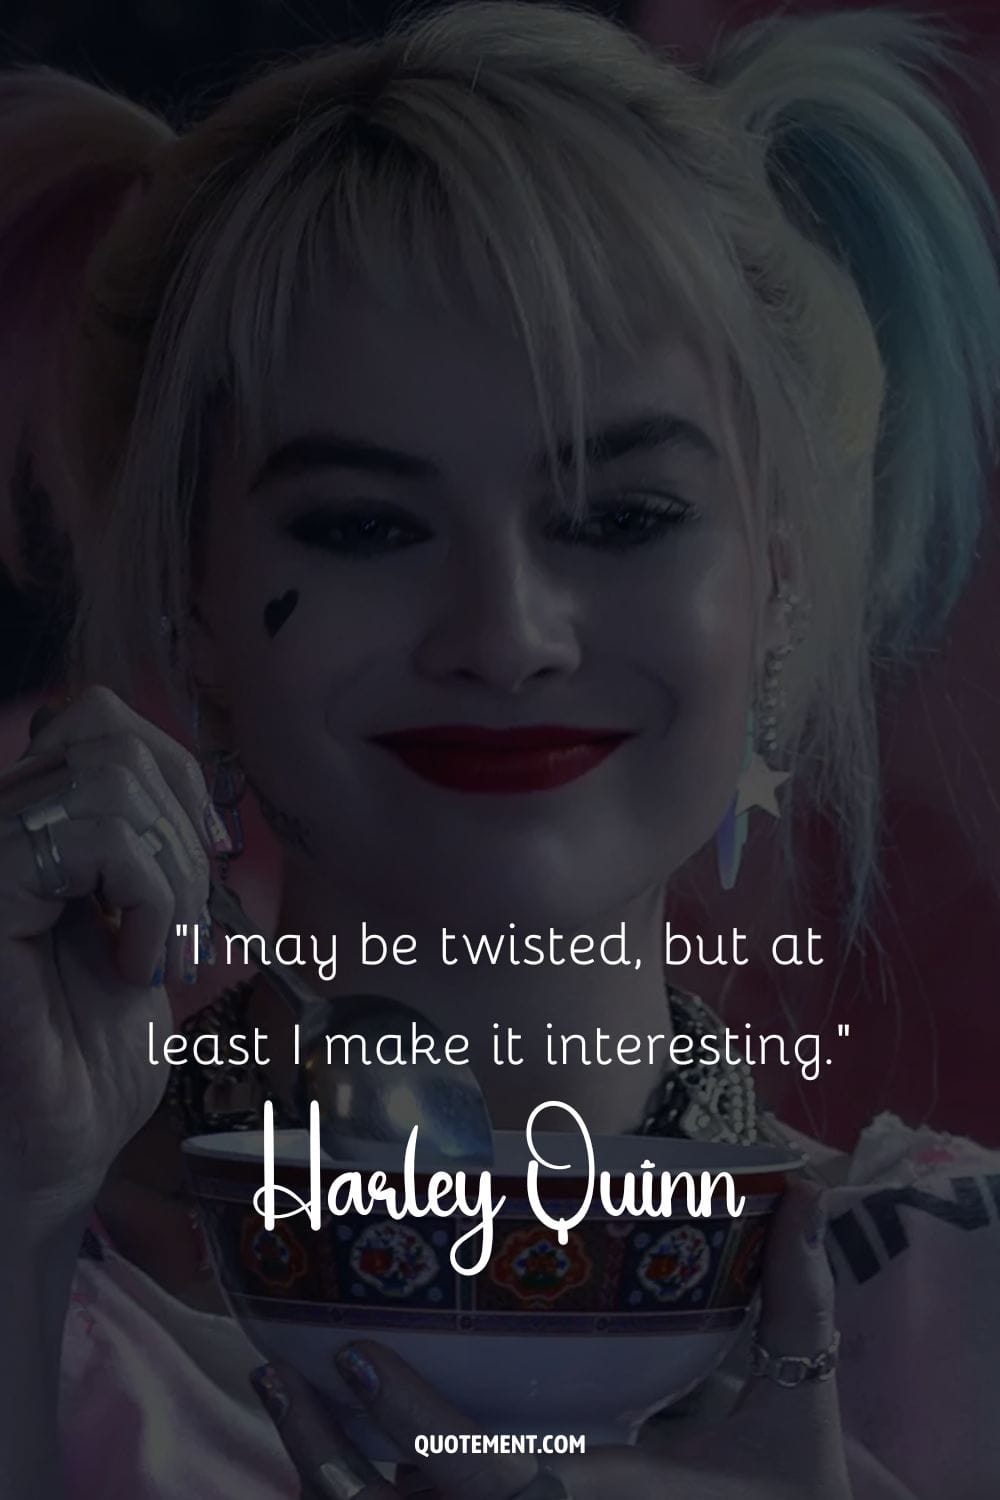 Harley Quinn's style is as bold as her.